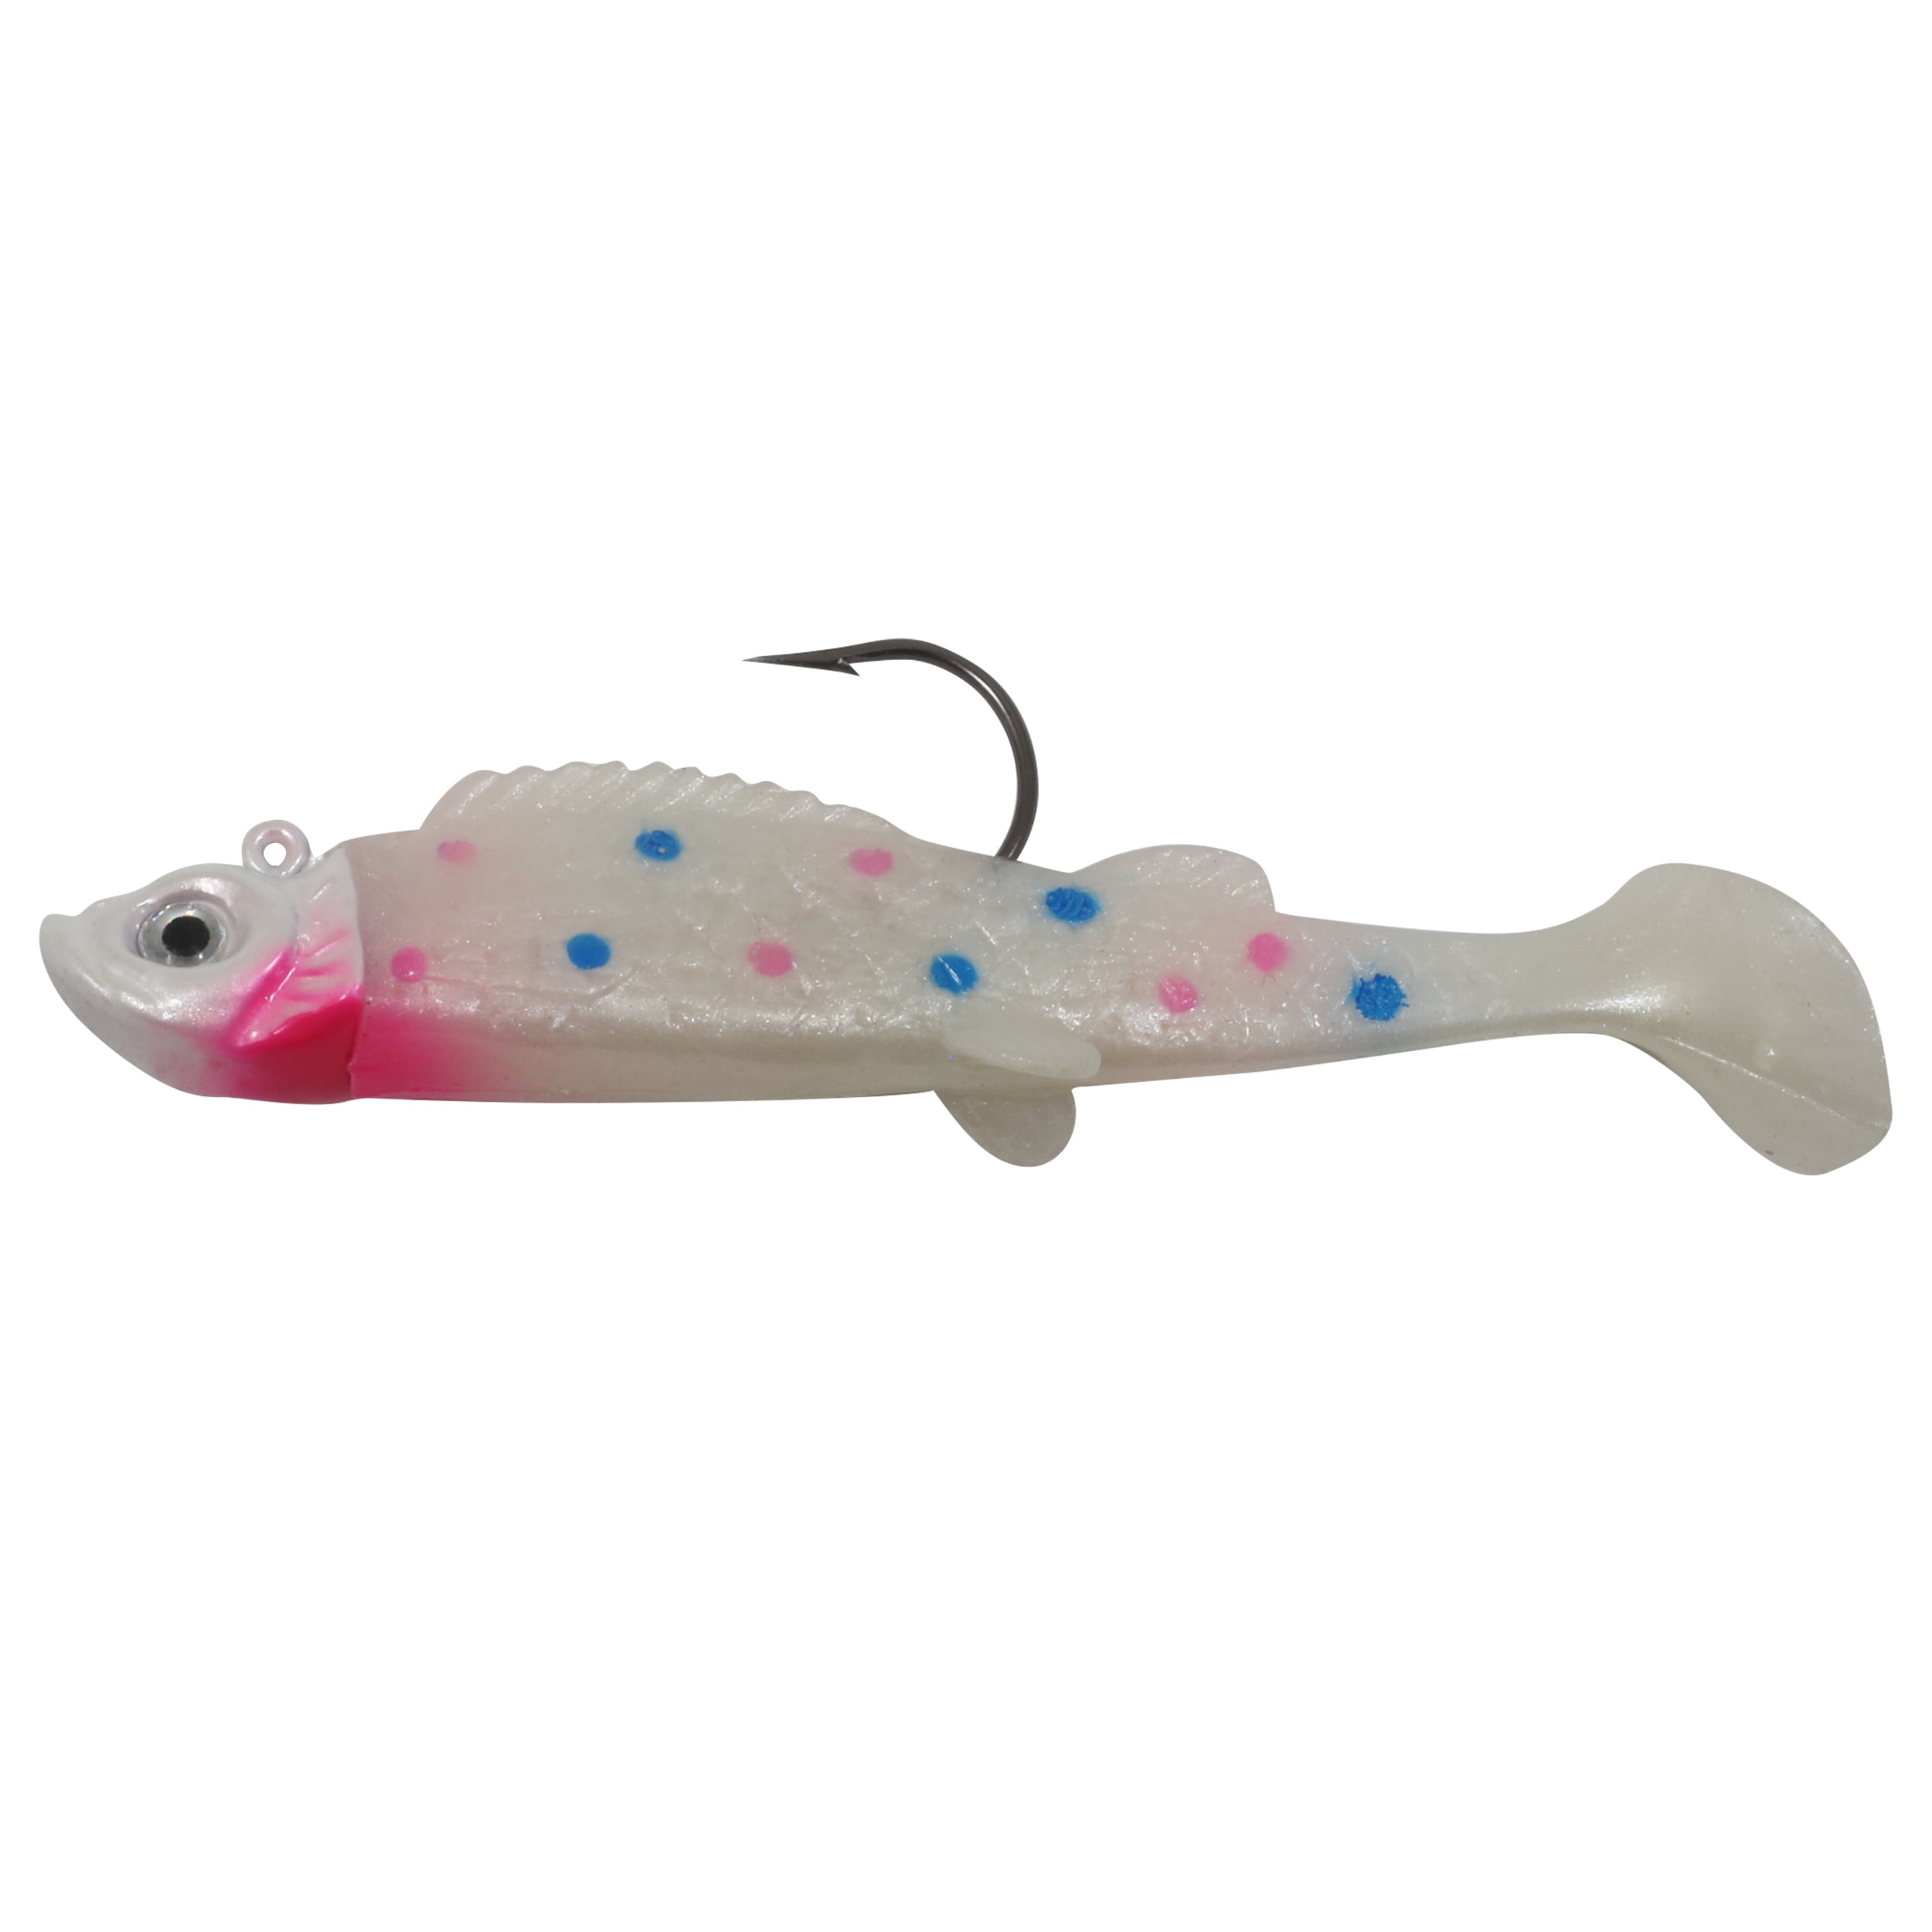 Northland Tackle Mimic Minnow Shad, Pre-Rigged Jig, Paddle Tail